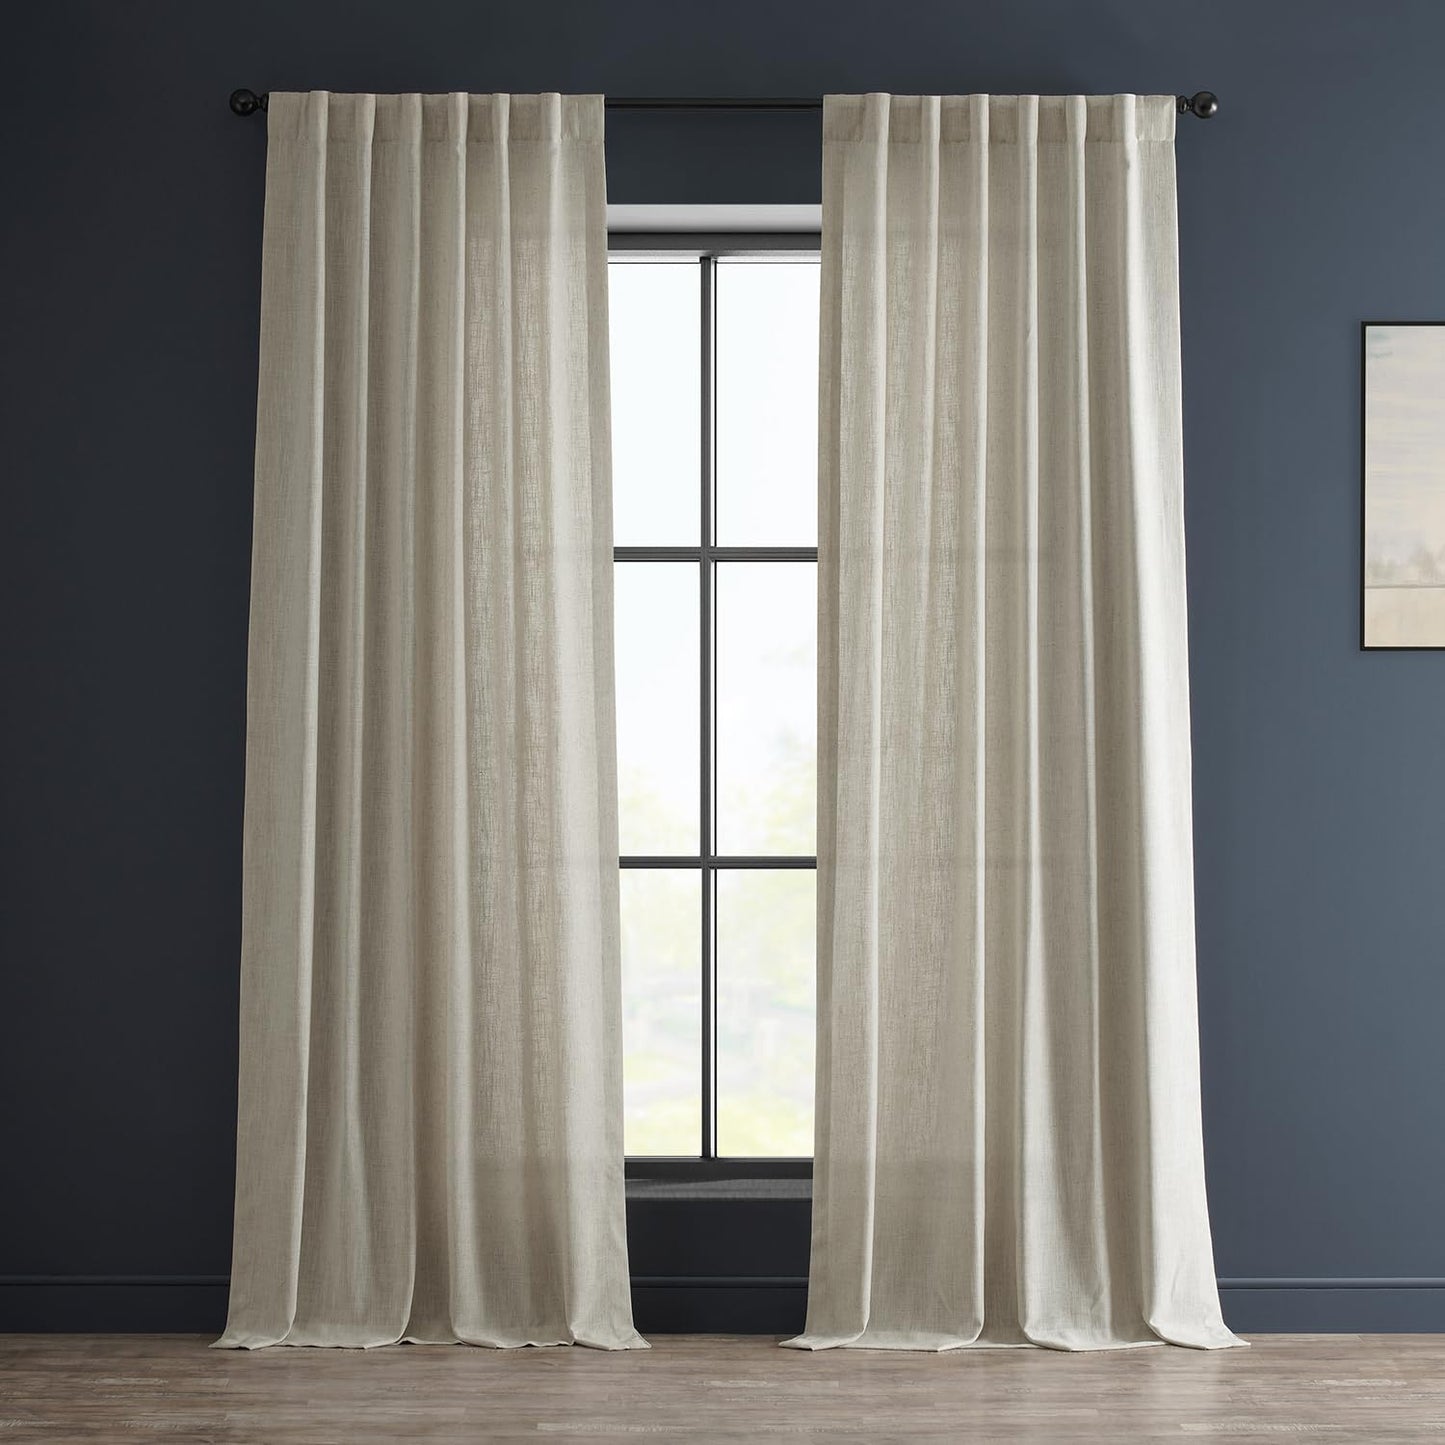 HPD Half Price Drapes Semi Sheer Faux Linen Curtains for Bedroom 96 Inches Long Light Filtering Living Room Window Curtain (1 Panel), 50W X 96L, Rice White  EFF Malted Cream 50W X 120L 